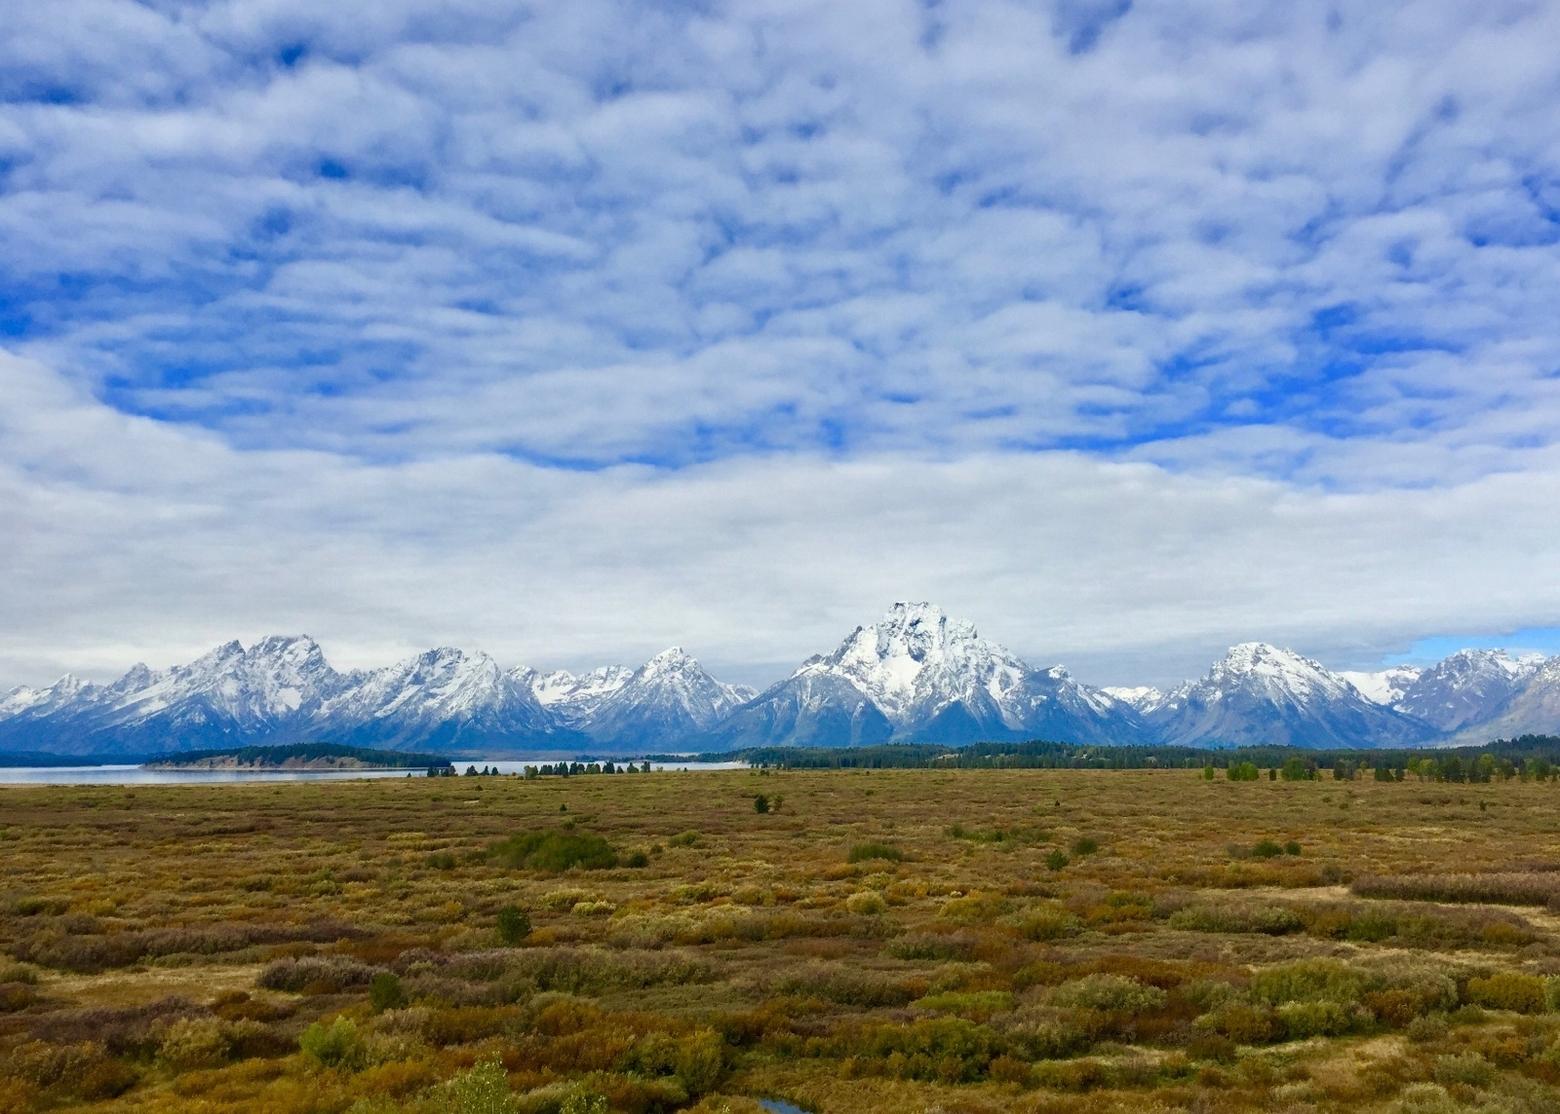 The Tetons from east of Jackson Lake.  Imagine if these flats, today teeming with wildlife and serving a visual sightline to the mountains, were instead covered with a residential subdivision or commercial development all the way almost to the water's edge. While today these lands are treasured as a vital part of Grand Teton National Park's character, some fought against landscape protection.  Photo by Todd Wilkinson